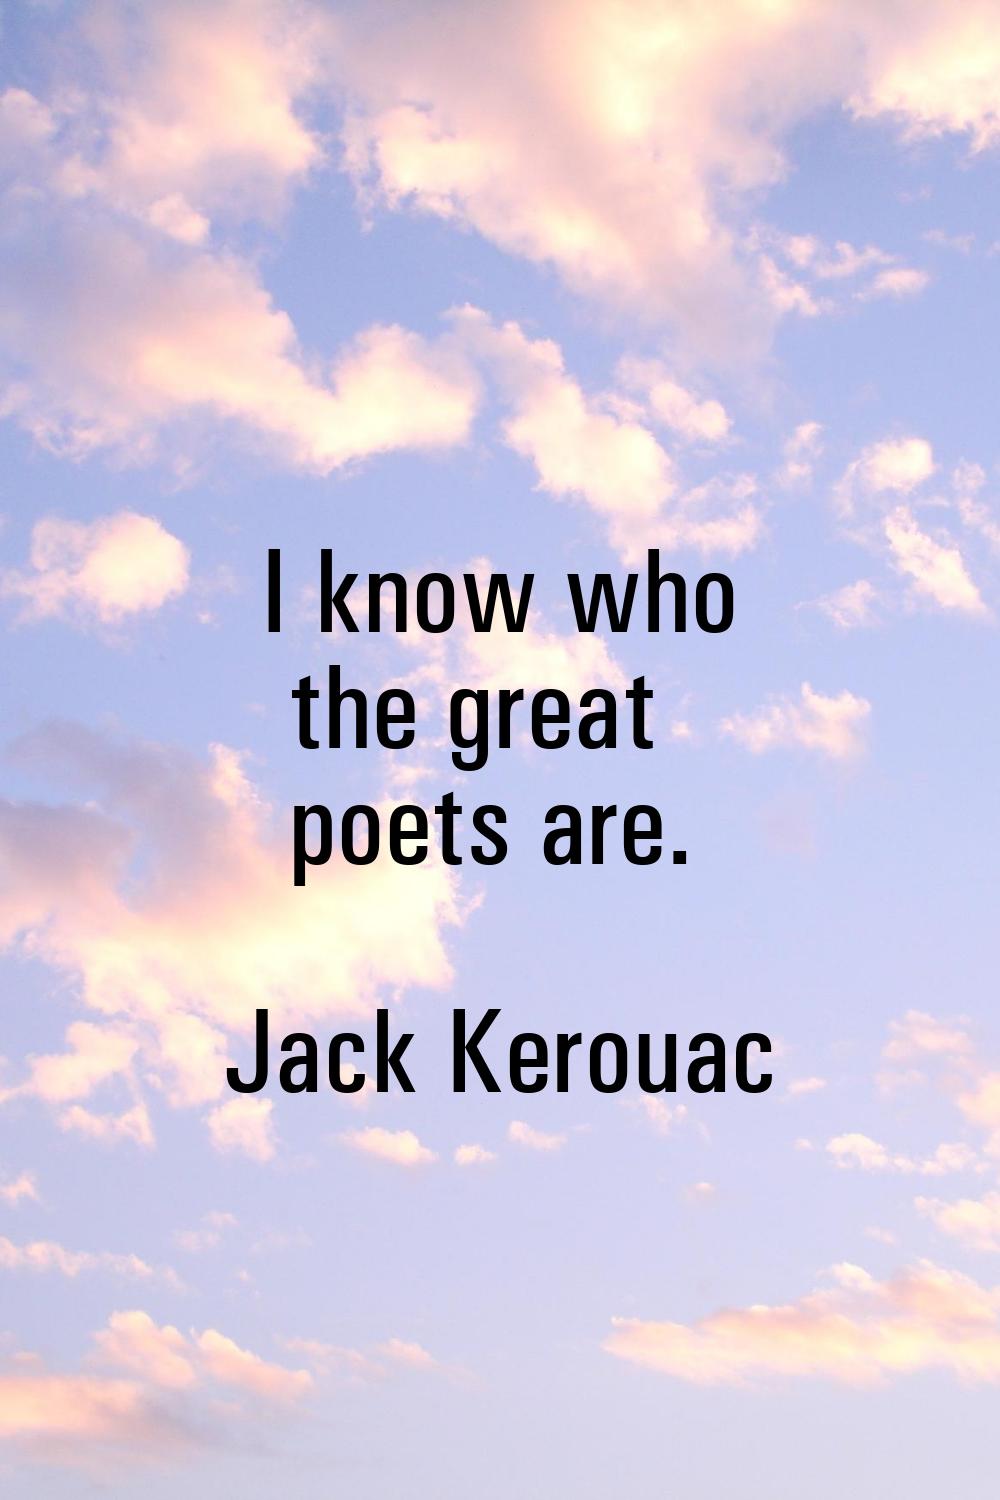 I know who the great poets are.